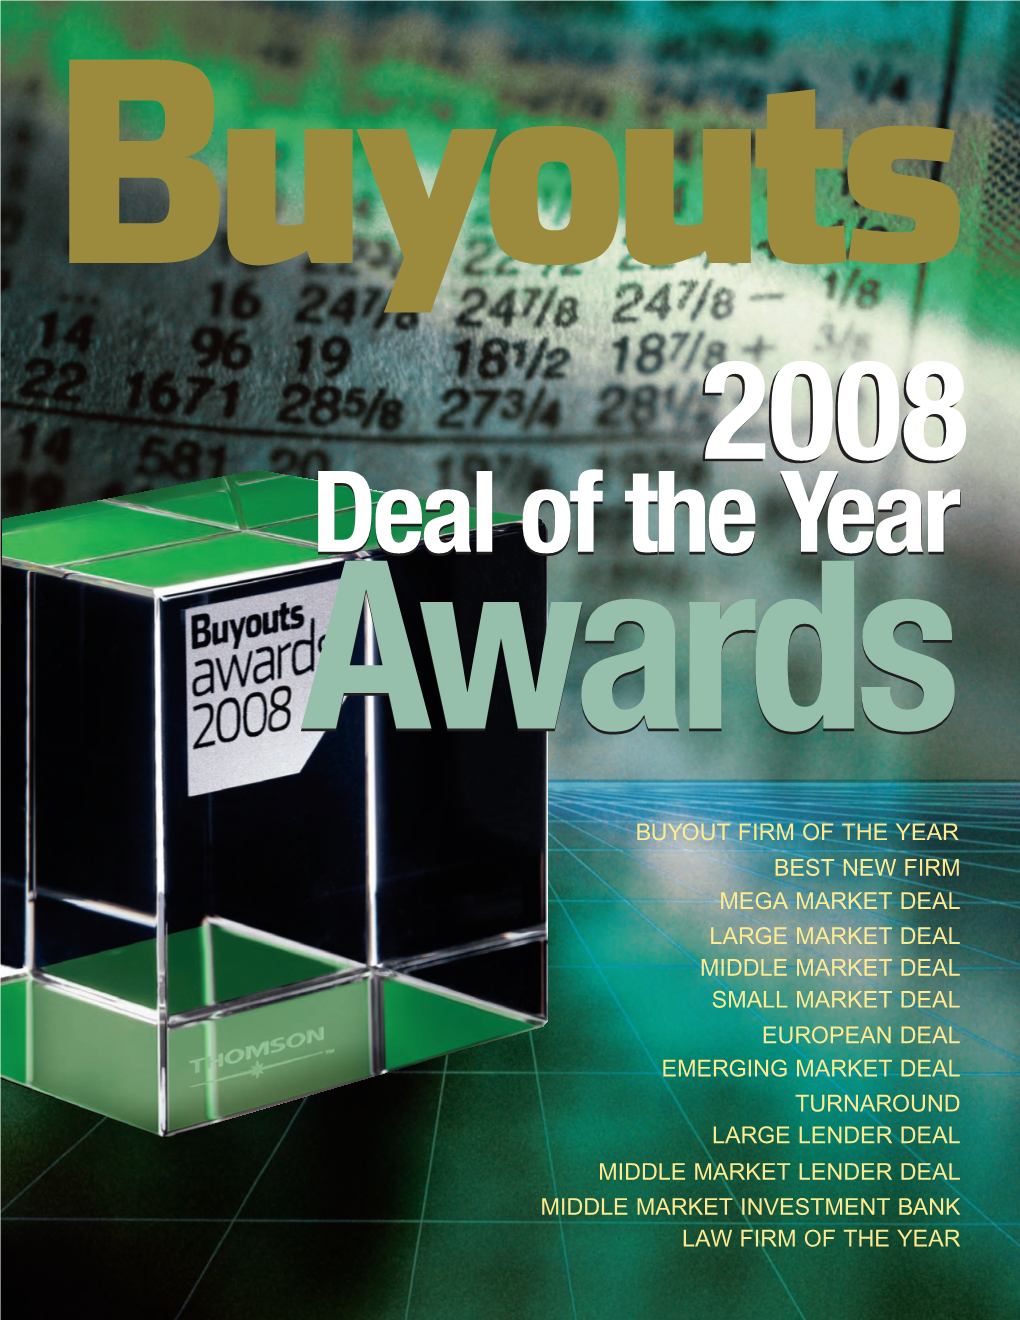 Buyouts Magazine's 2008 Deal of the Year Awards